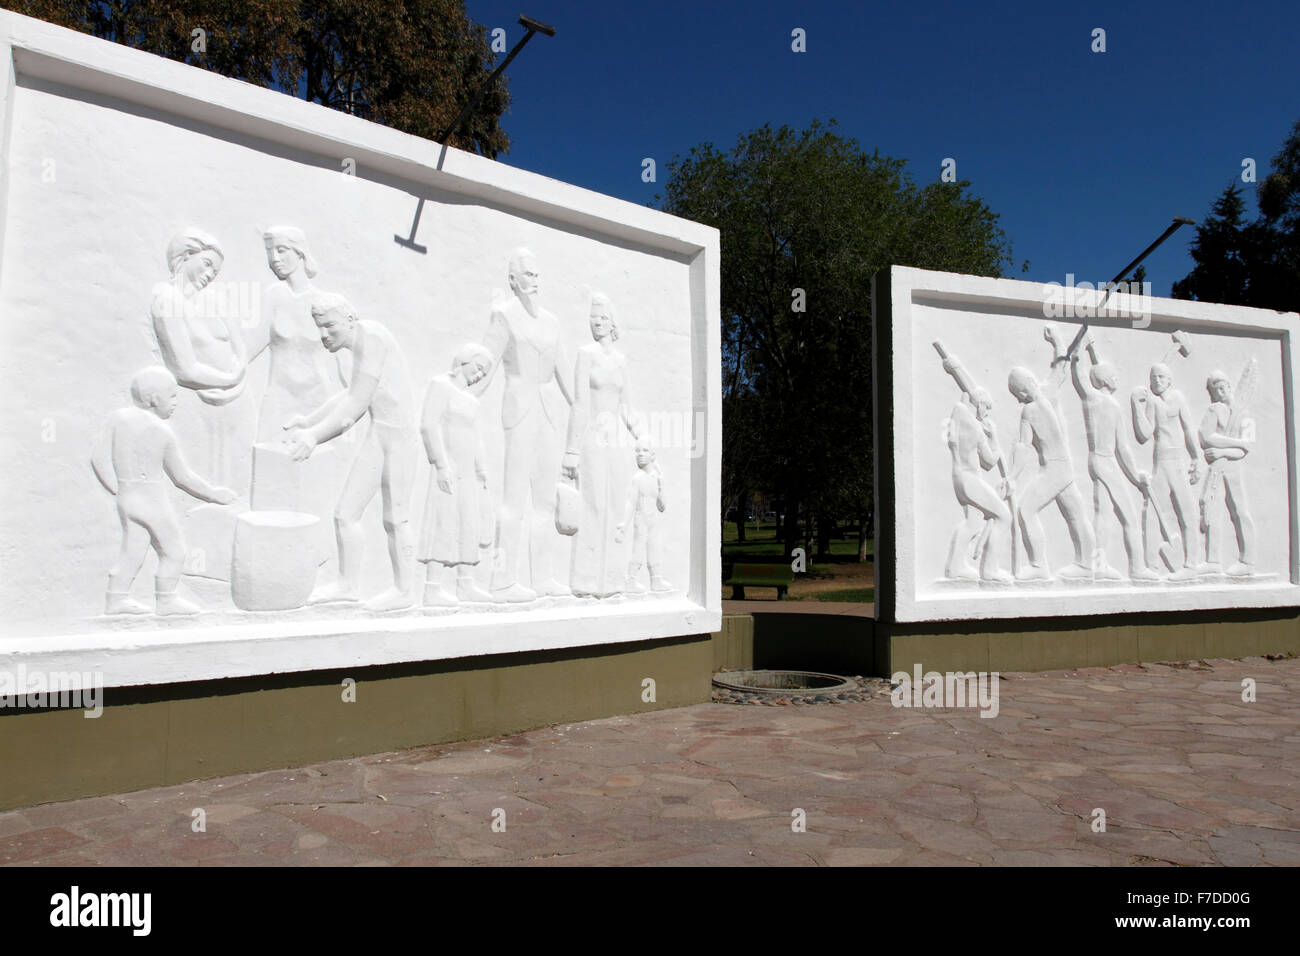 Relief panels commemorating the arrival of the Welsh in Patagonia. Telew, Chubut Province, Argentina. Stock Photo